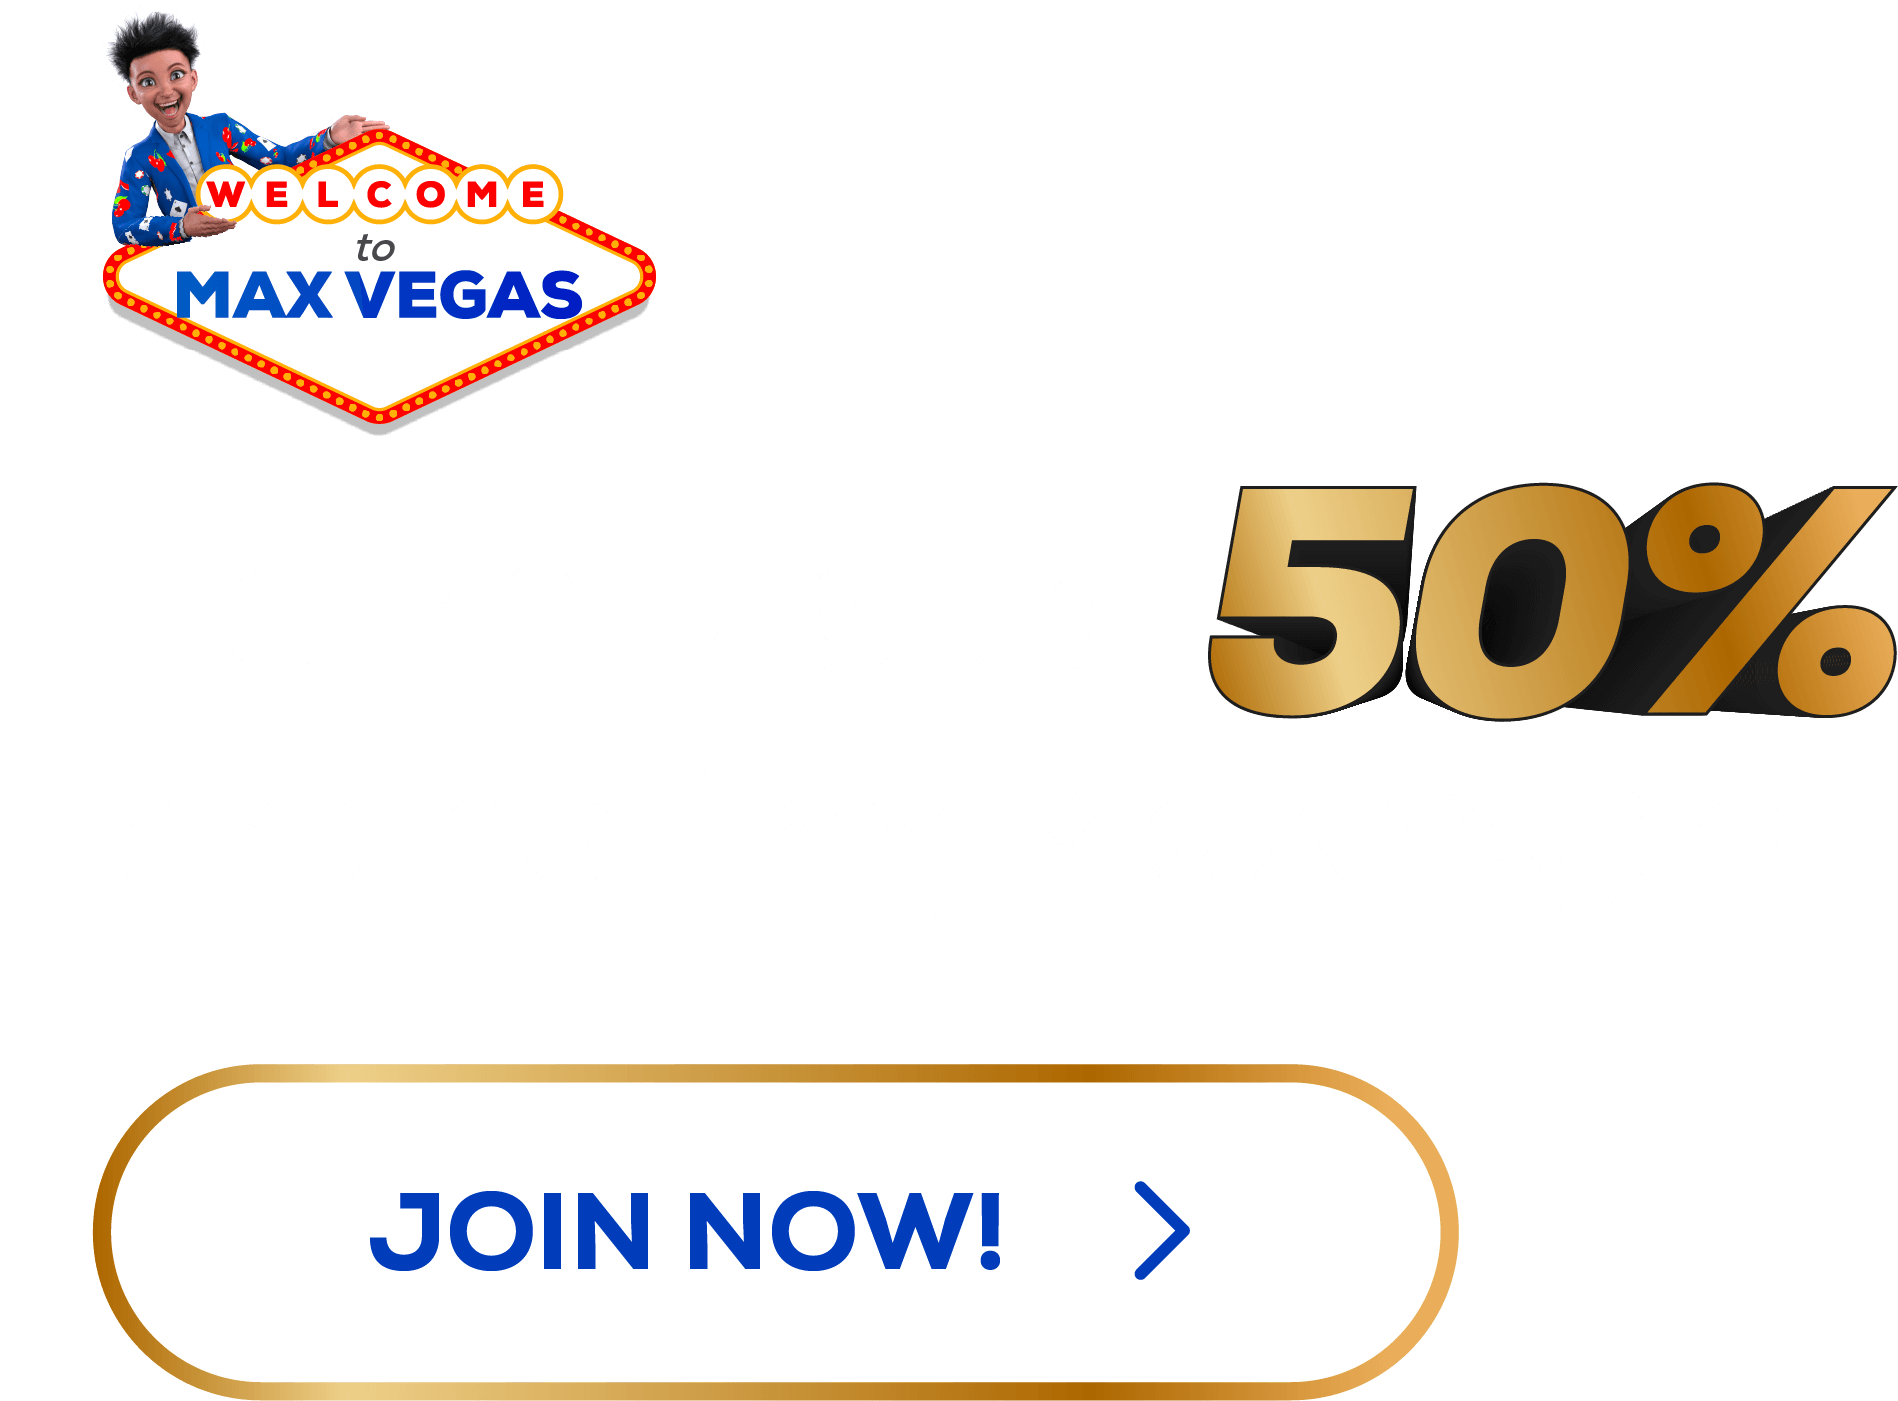 Earn up to 50% peomoting MaxVegas@3x